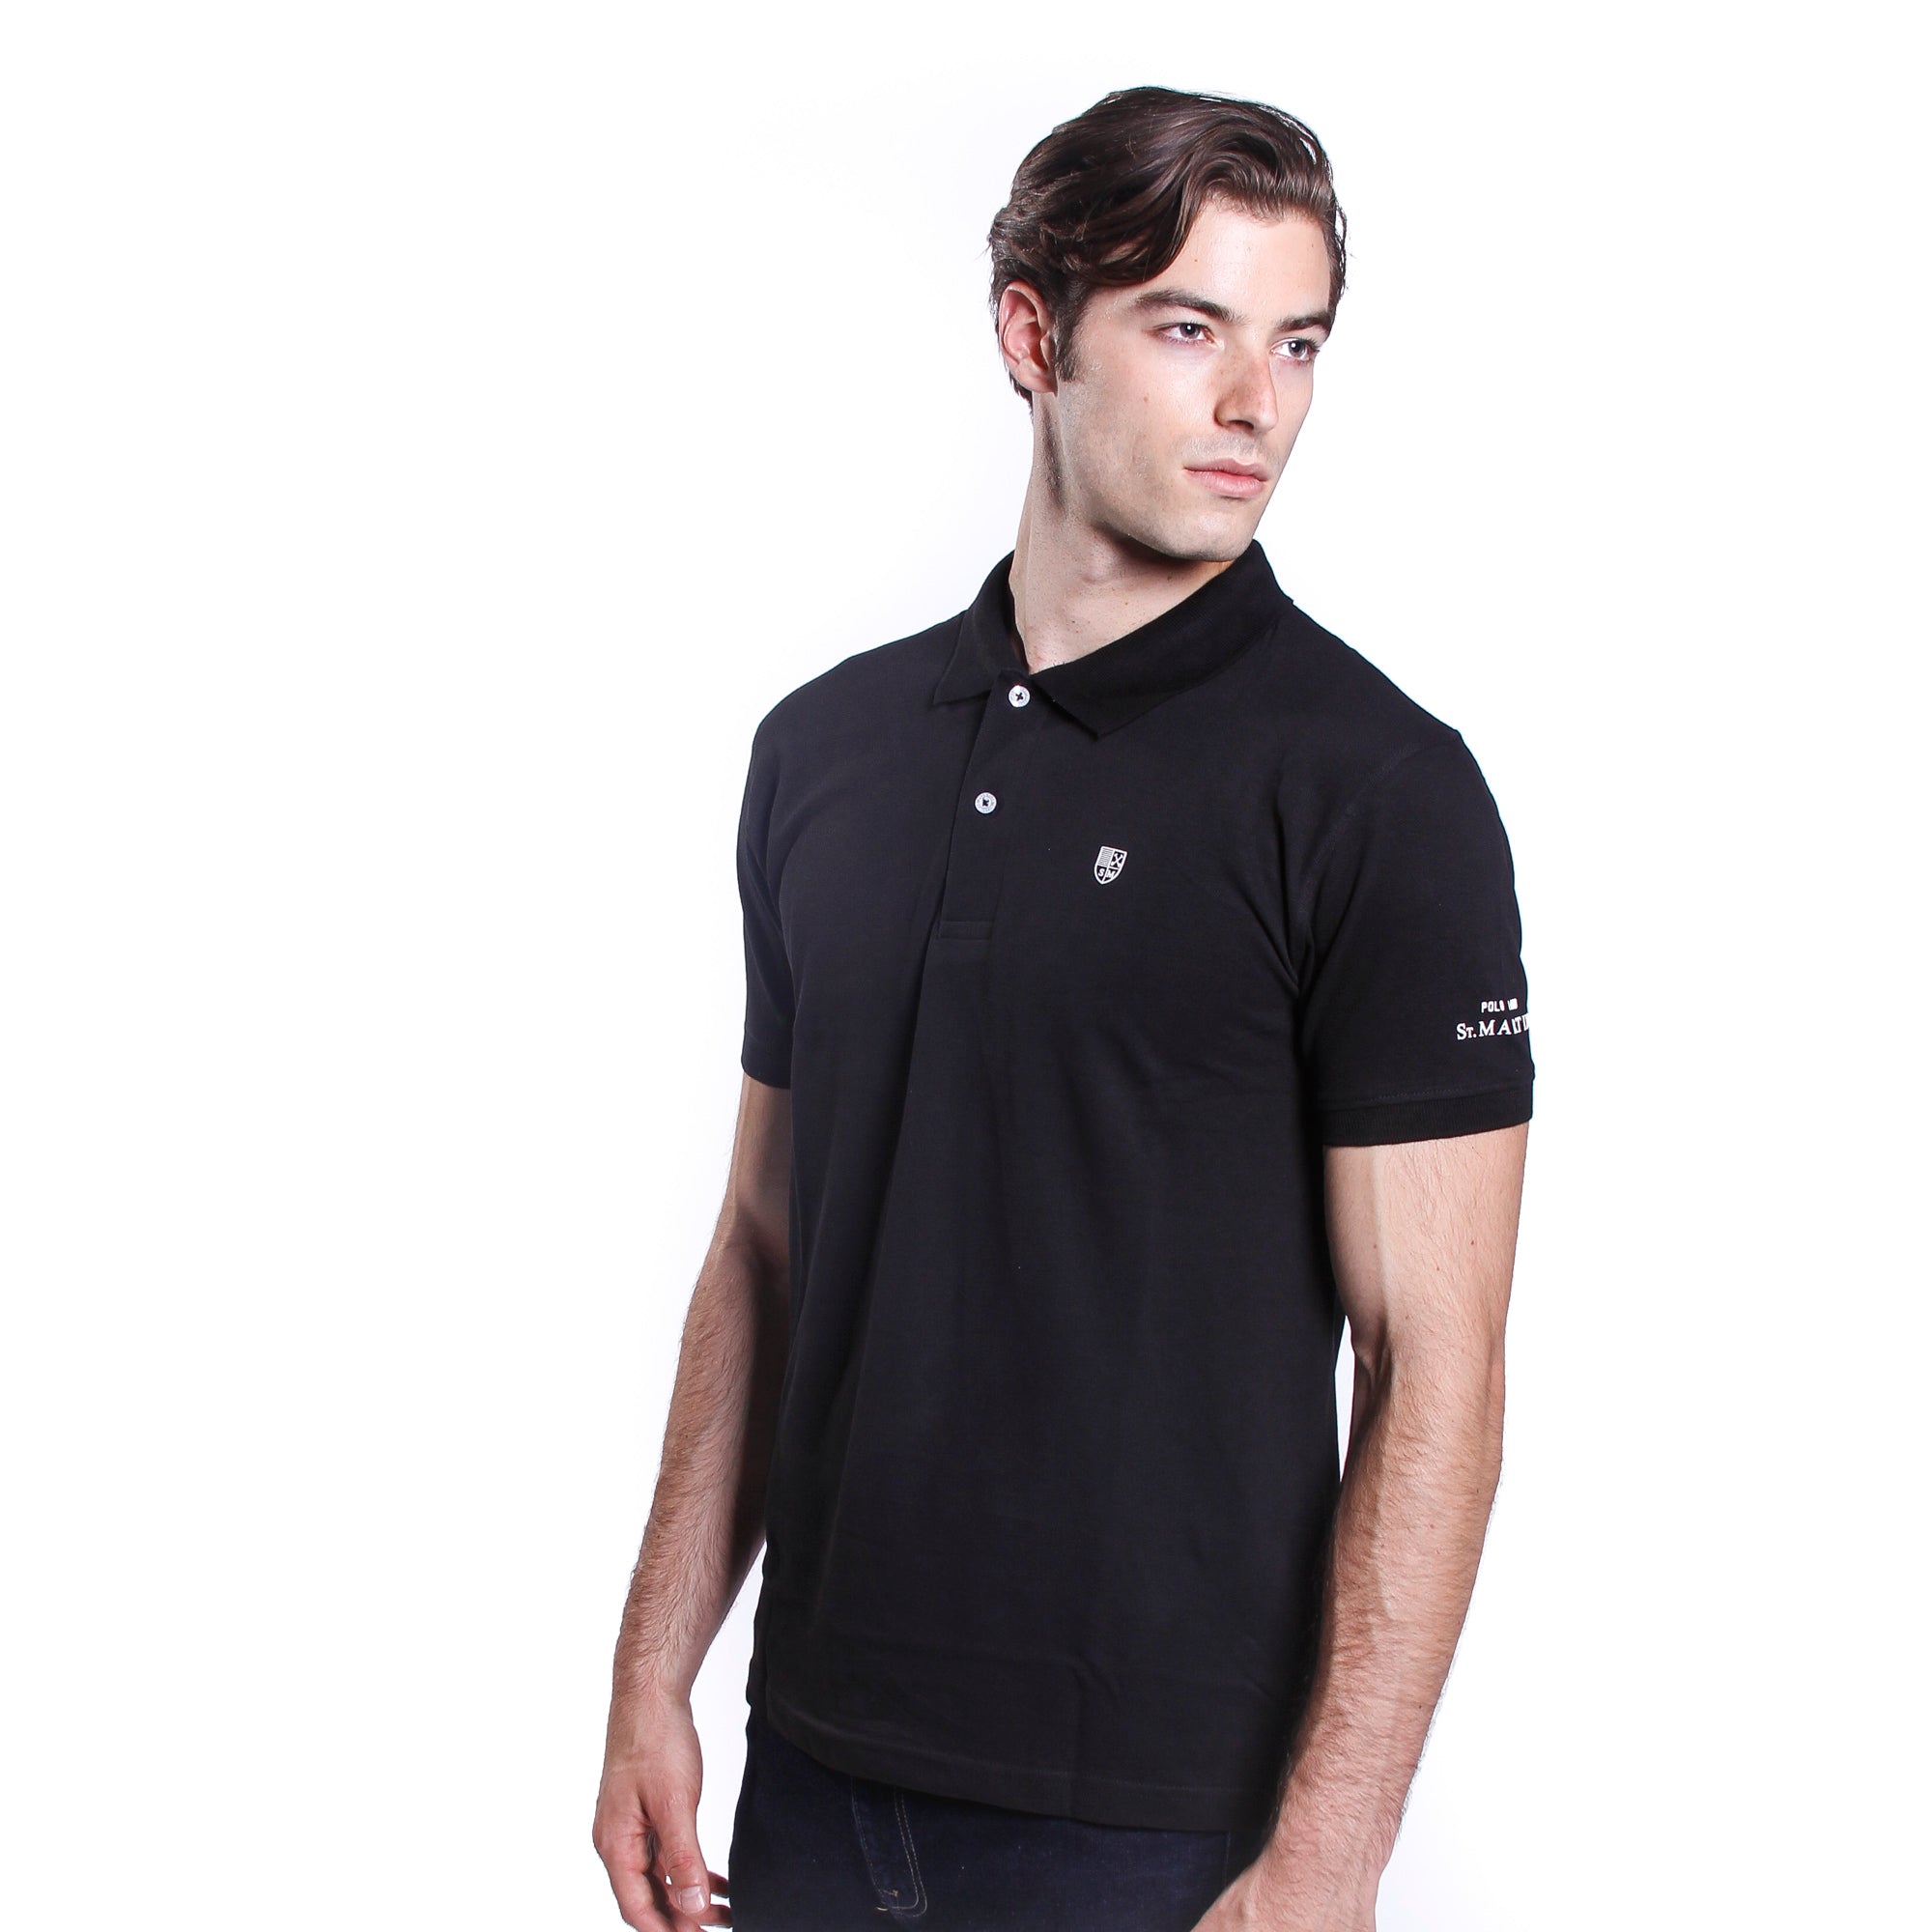 Piqué polo shirt with embroidery on the sleeve